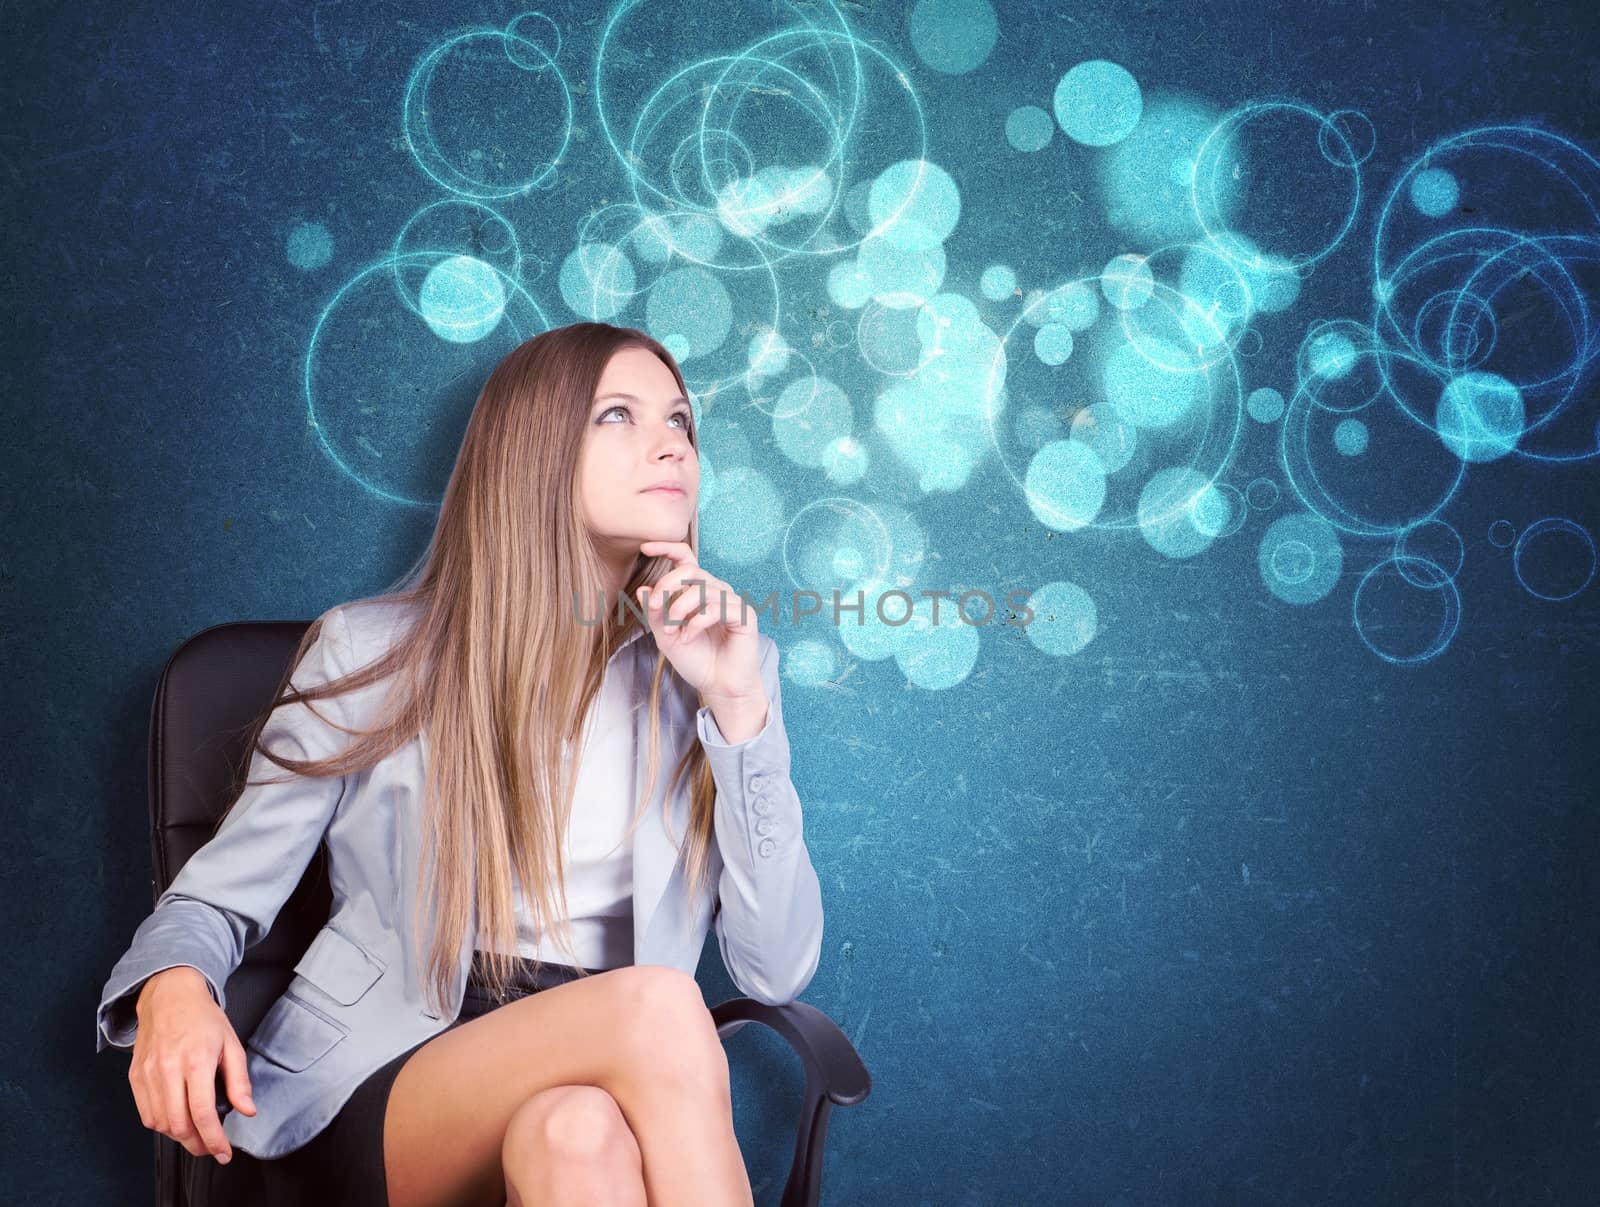 Woman in jacket and blouse sits on chair and looking up. Abstract background with circles